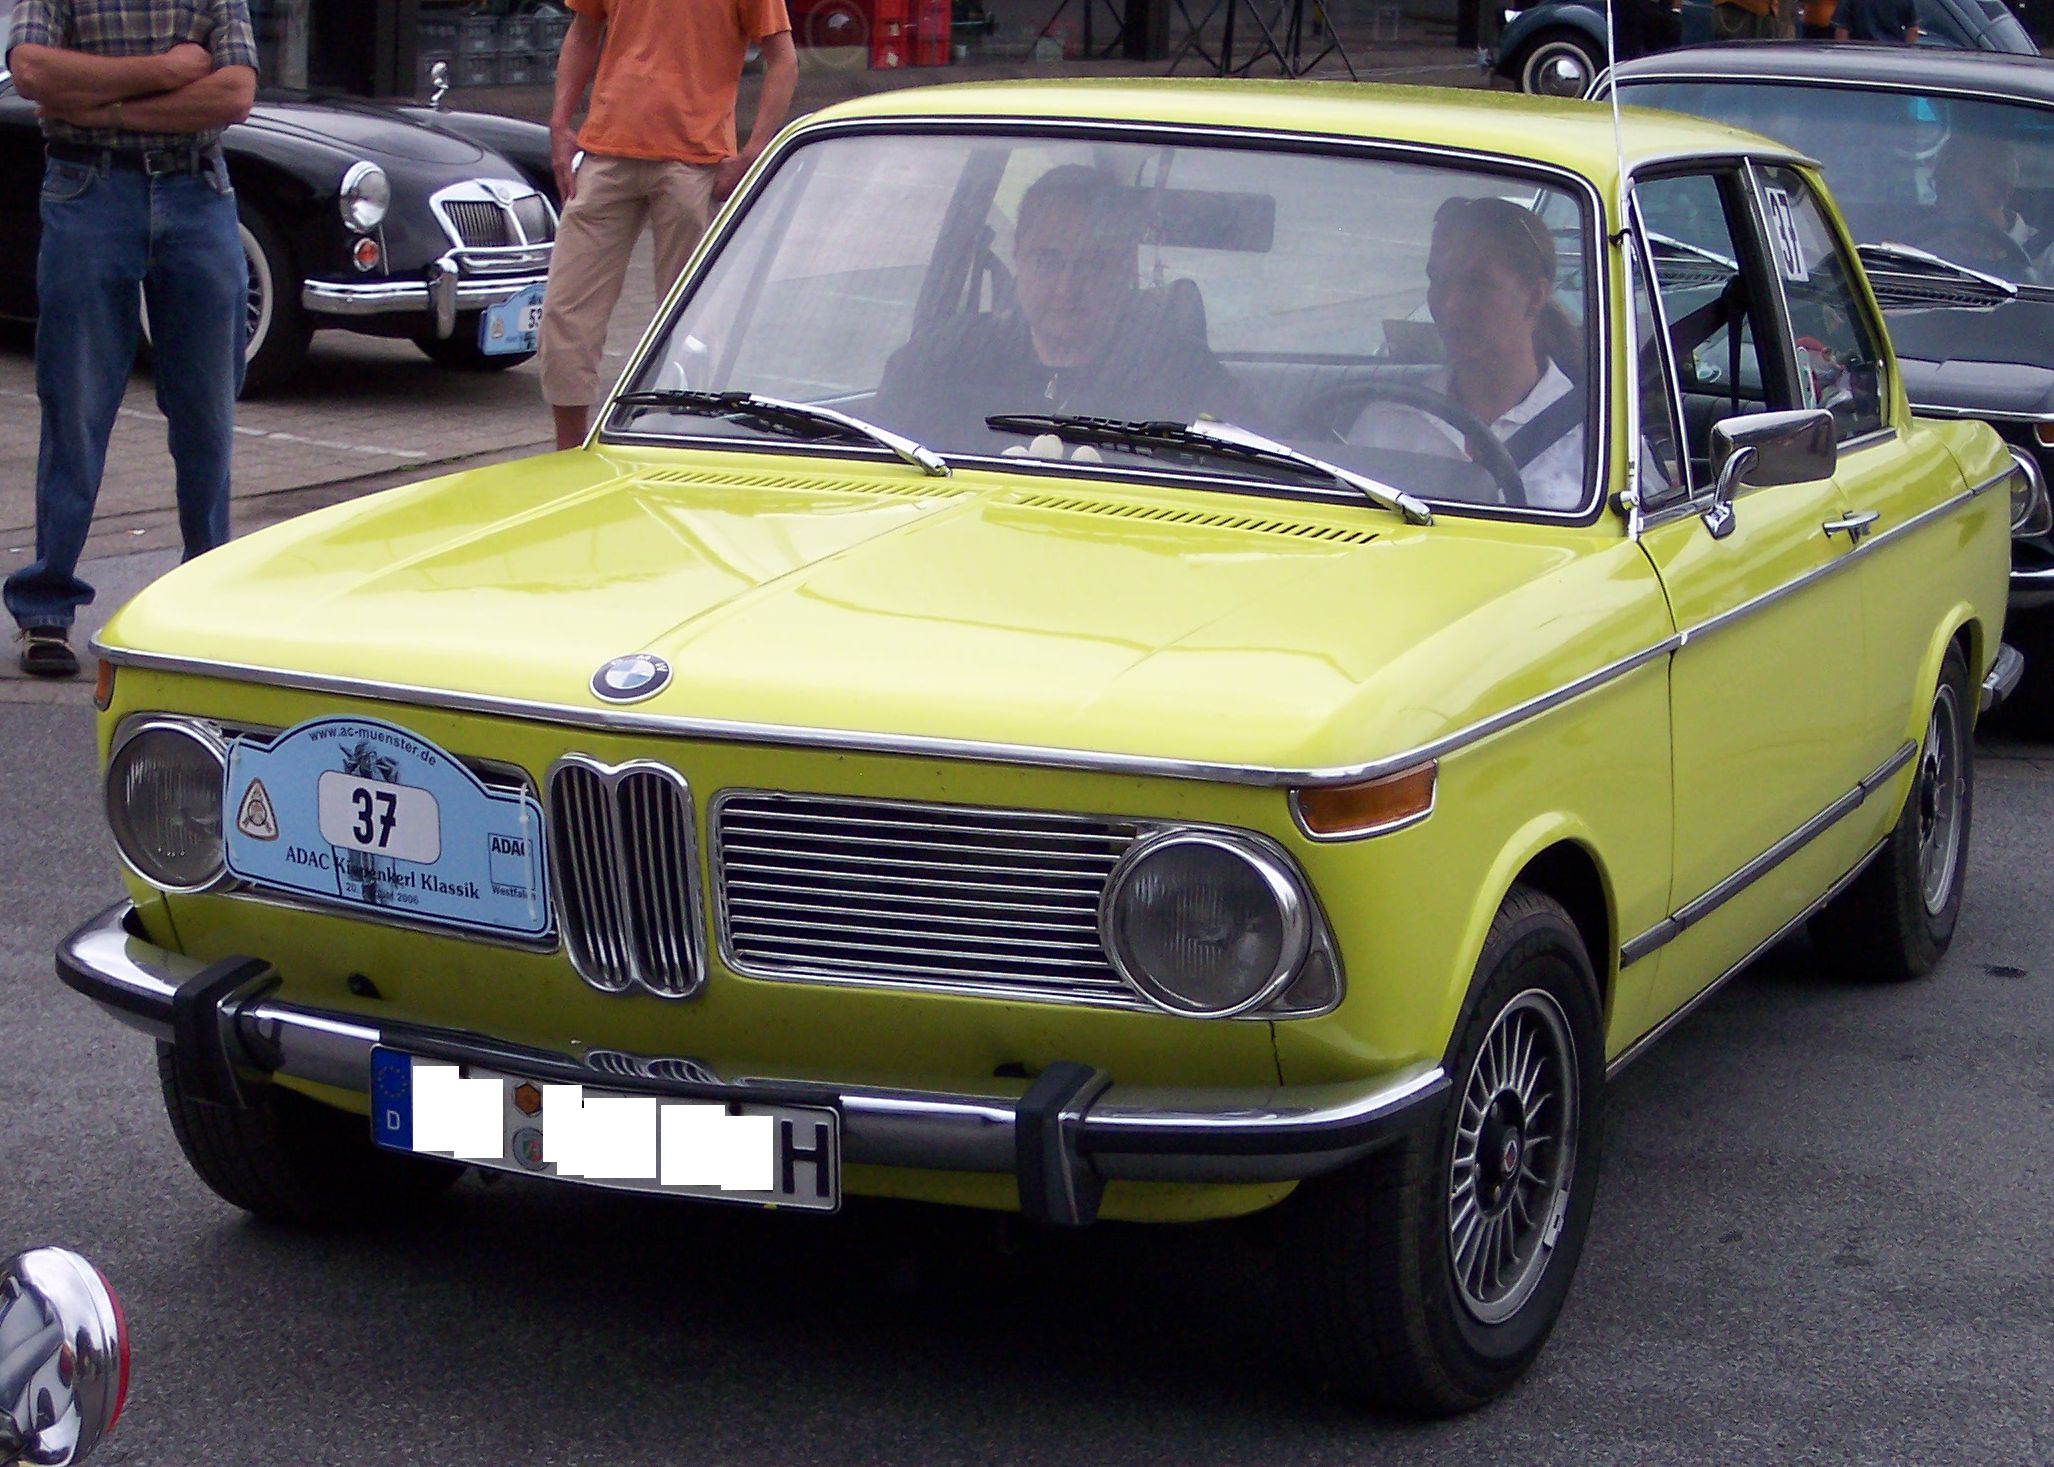 Dave's Discount Auto Parts has a large selection of BMW 1802 parts in stock